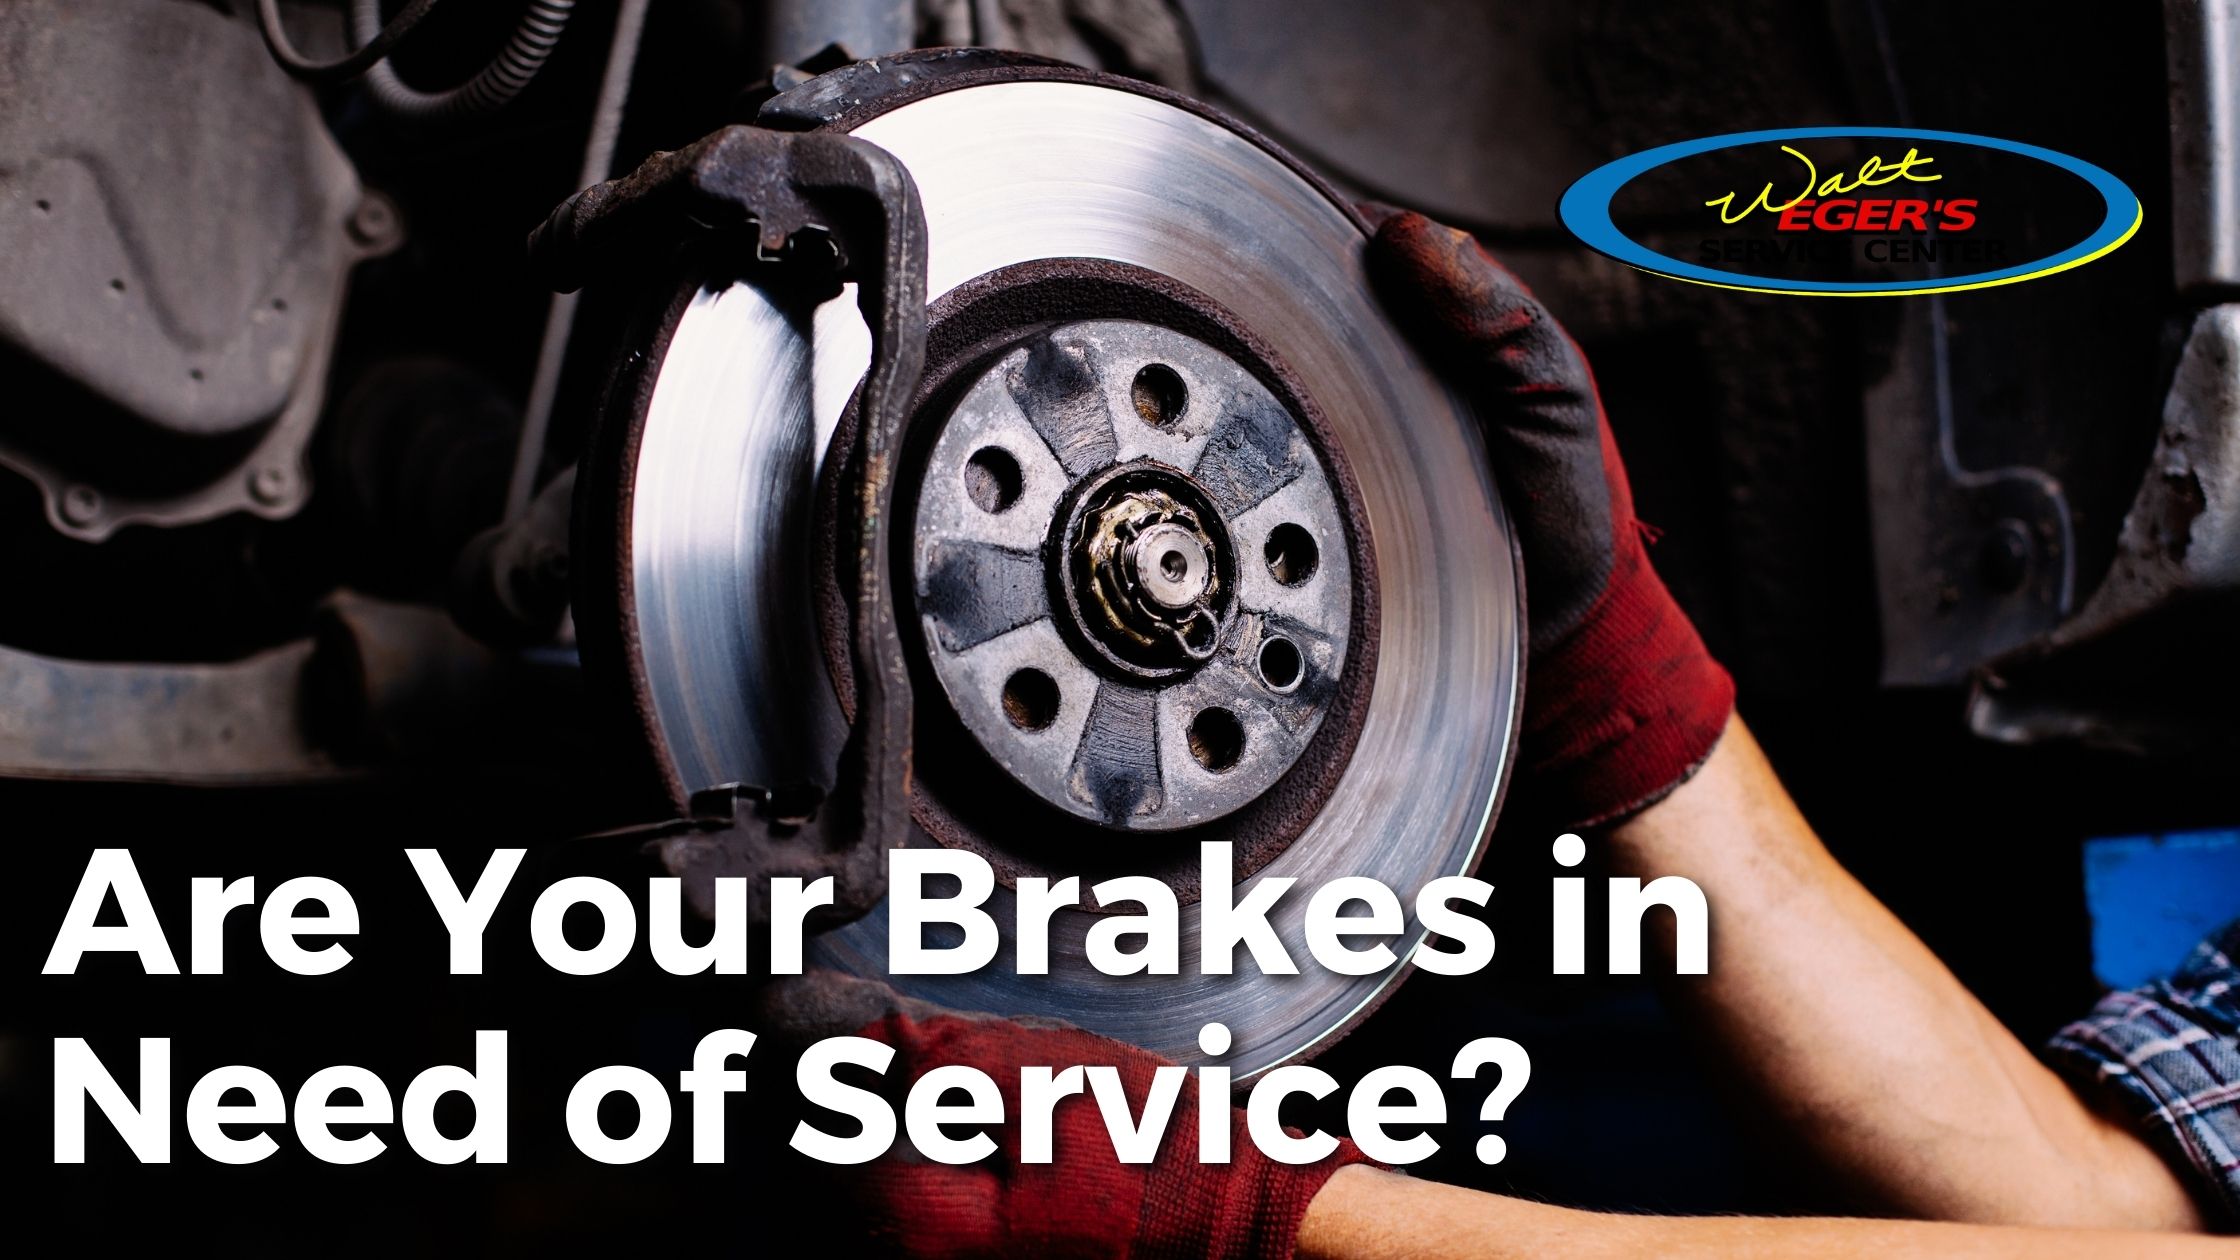 Get ready to hit the road this holiday season! Check your brakes and have them serviced before you and your family travel. Trust Walt Eger's Service Center to keep you and your family stopping and going safely. Make an appointment today for expert auto repair in Severn, MD! 